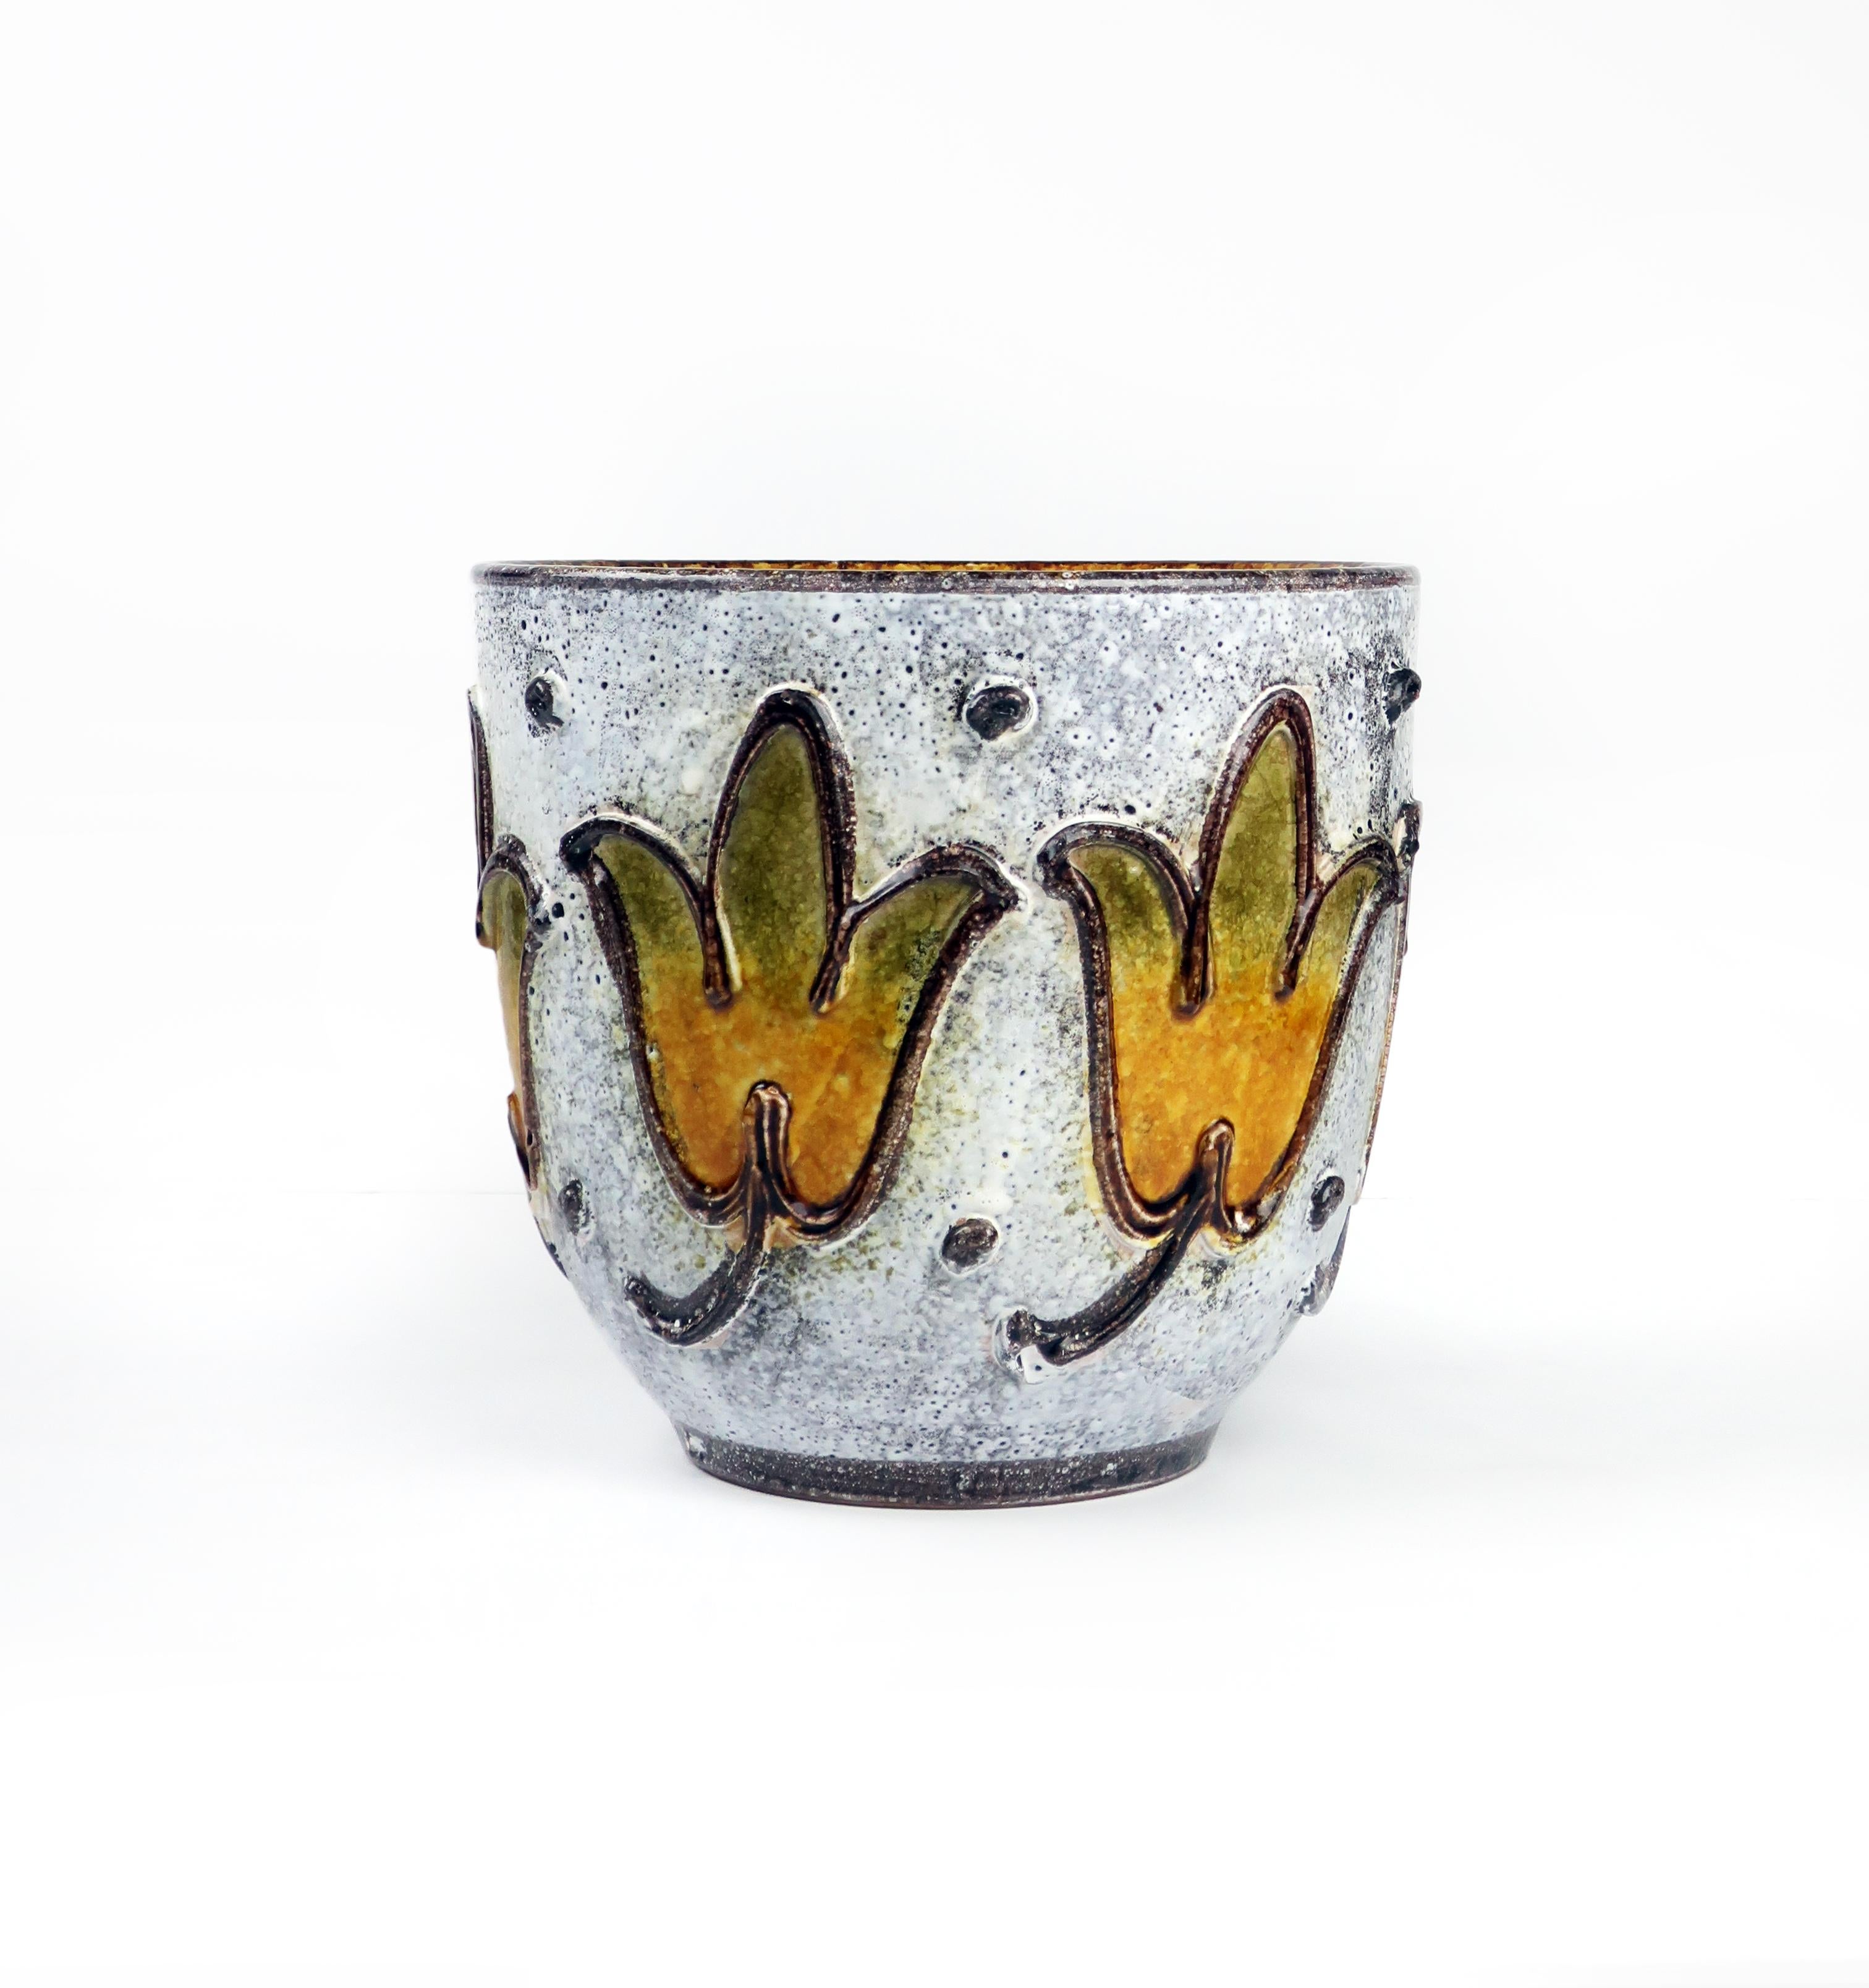 A large hand-painted ceramic planter in the style of Bitossi, Raymor, and Rosenthal Netter. White lava glaze over a dark base glaze with applied flowers and decorative elements. Beautifully hand painted with no signs of wear, use, or